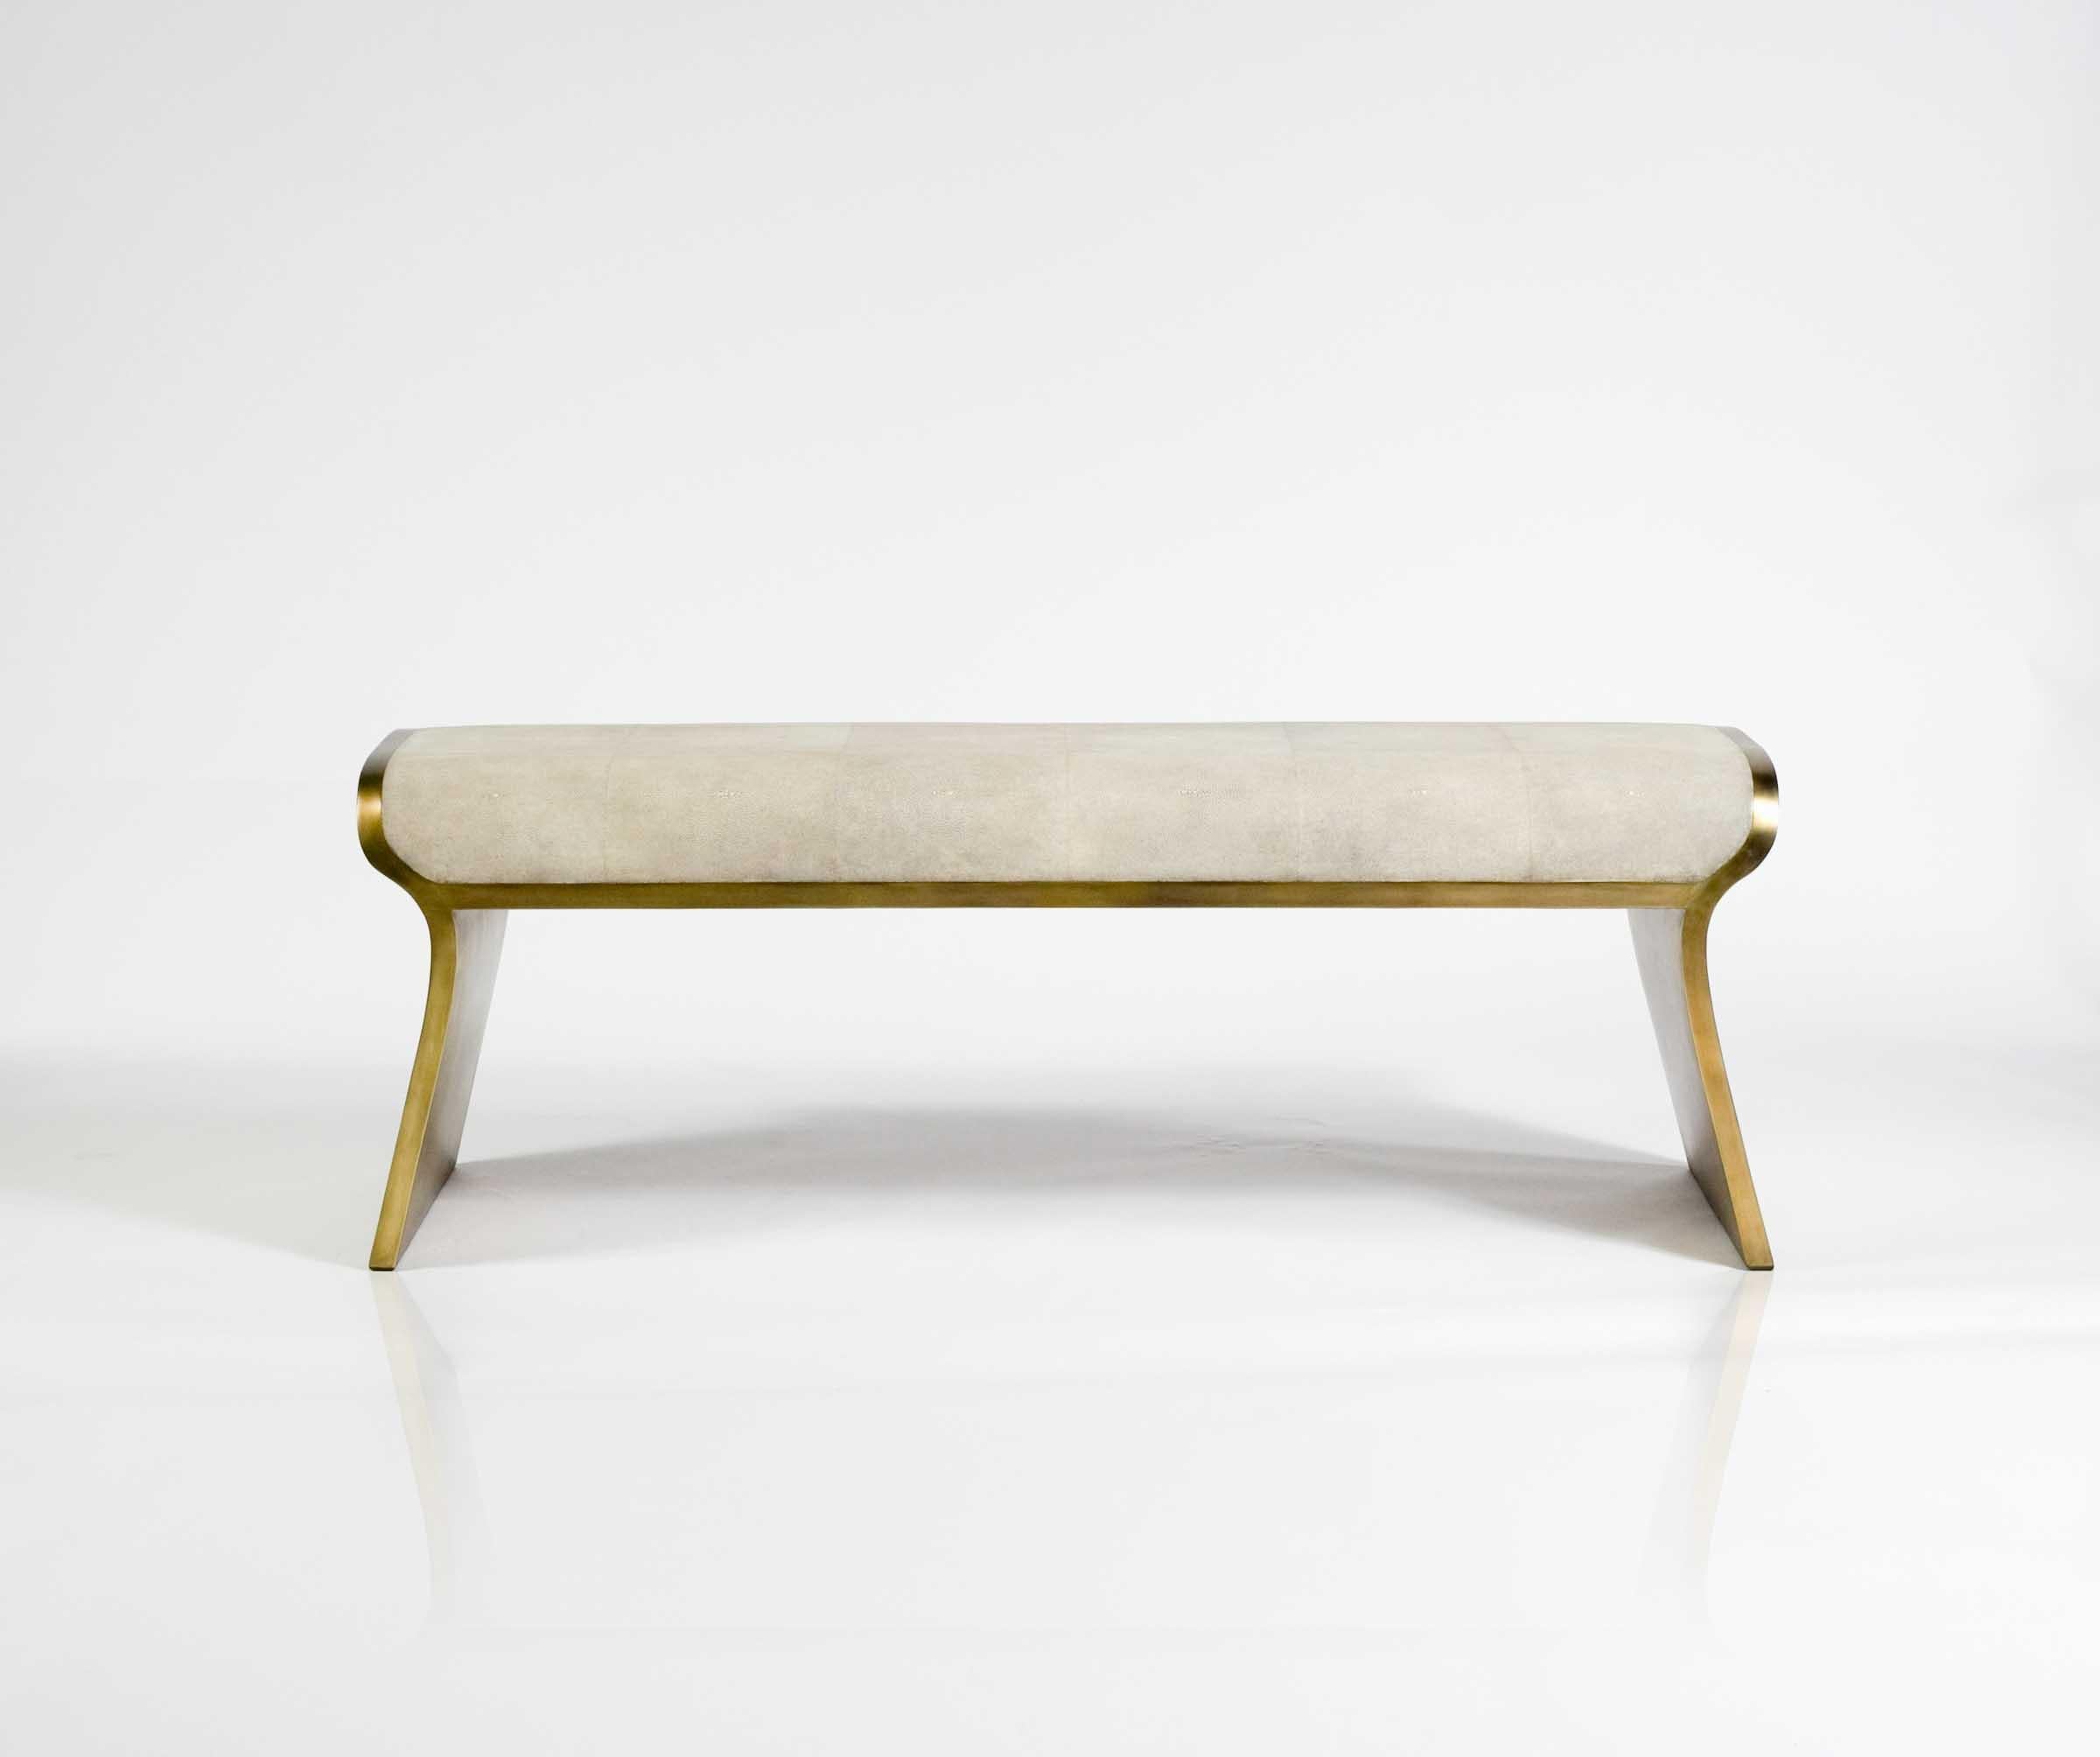 The Dandy day bench is the ultimate luxury seating. The seating area is inlaid in celadon Shagreen and the frame and sides of the bench are completely inlaid in bronze-patina brass. Other finish versions are available see images at end of slide. A